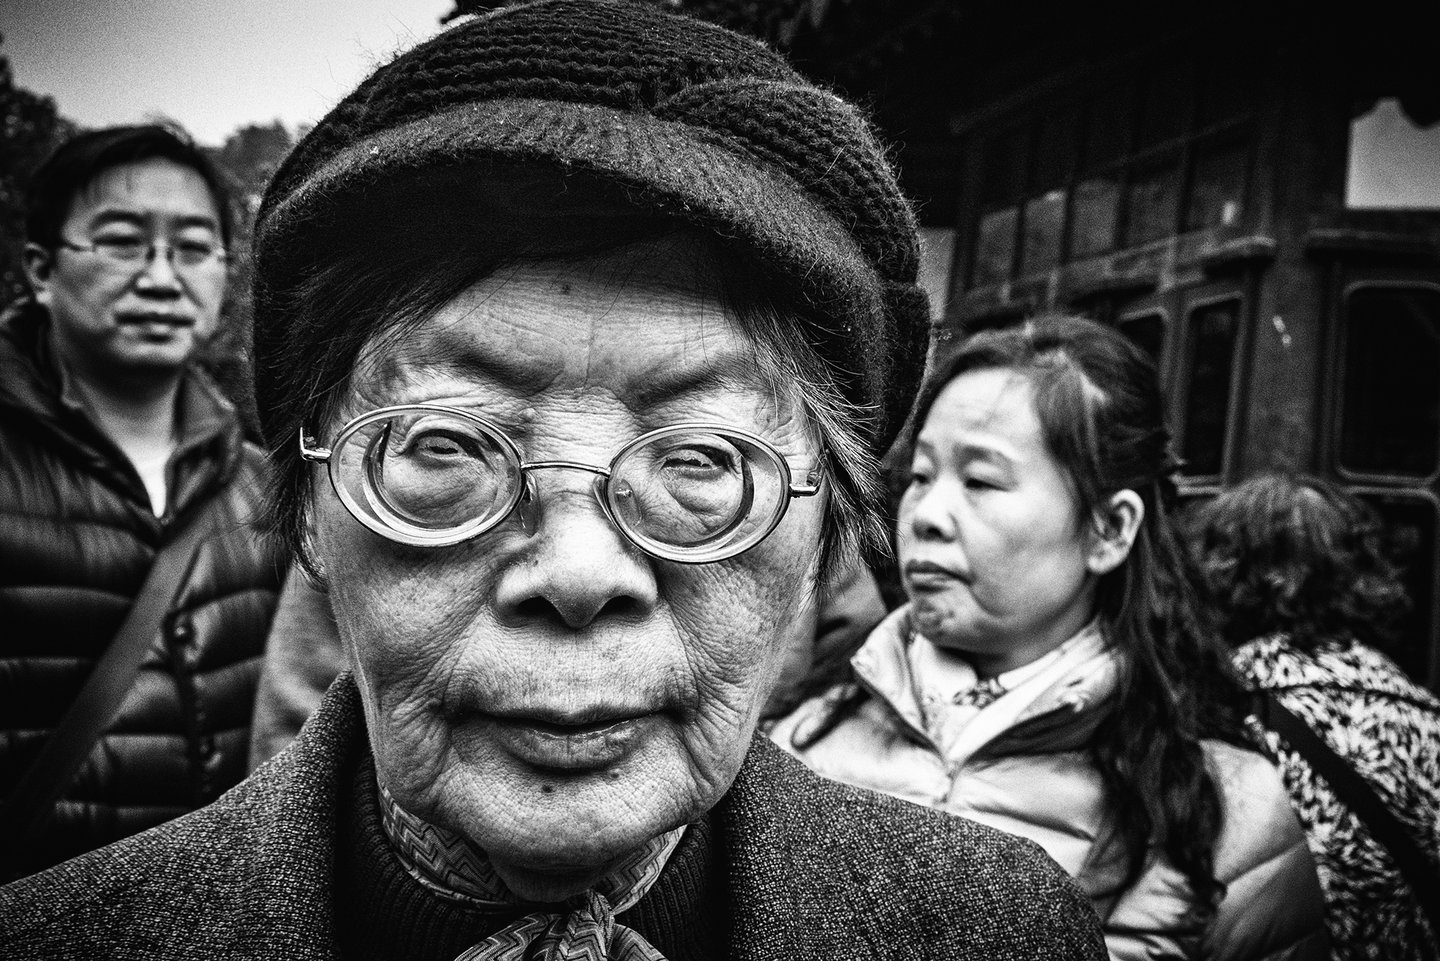 “It feels as if I am trying to steal a part of their souls”: Hiroyuki Nakada on his time-stopping street photography